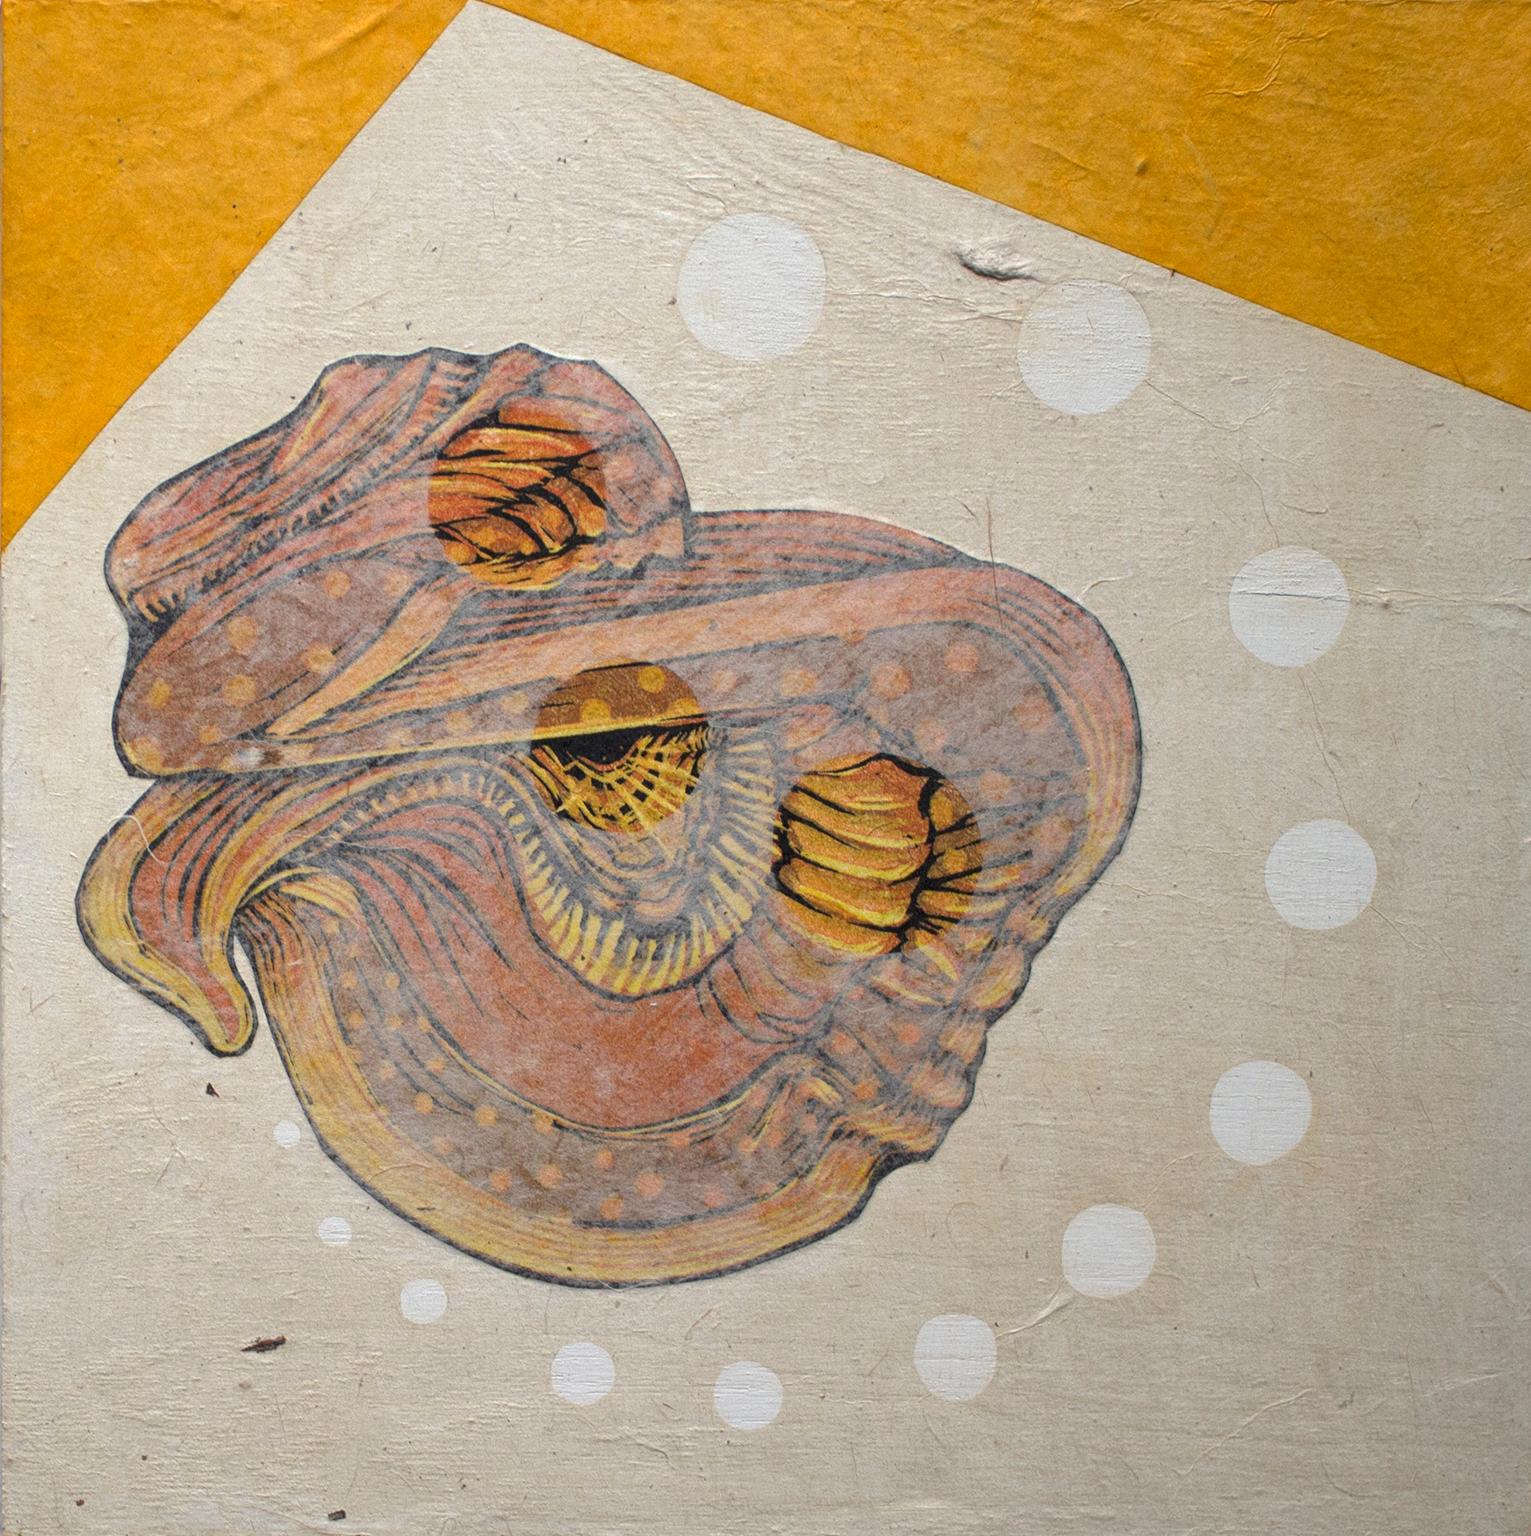 TuckSpin III by Courtney Googe. Reduction relief print. Yellow and white colors - Mixed Media Art by Courtney Nicole Googe